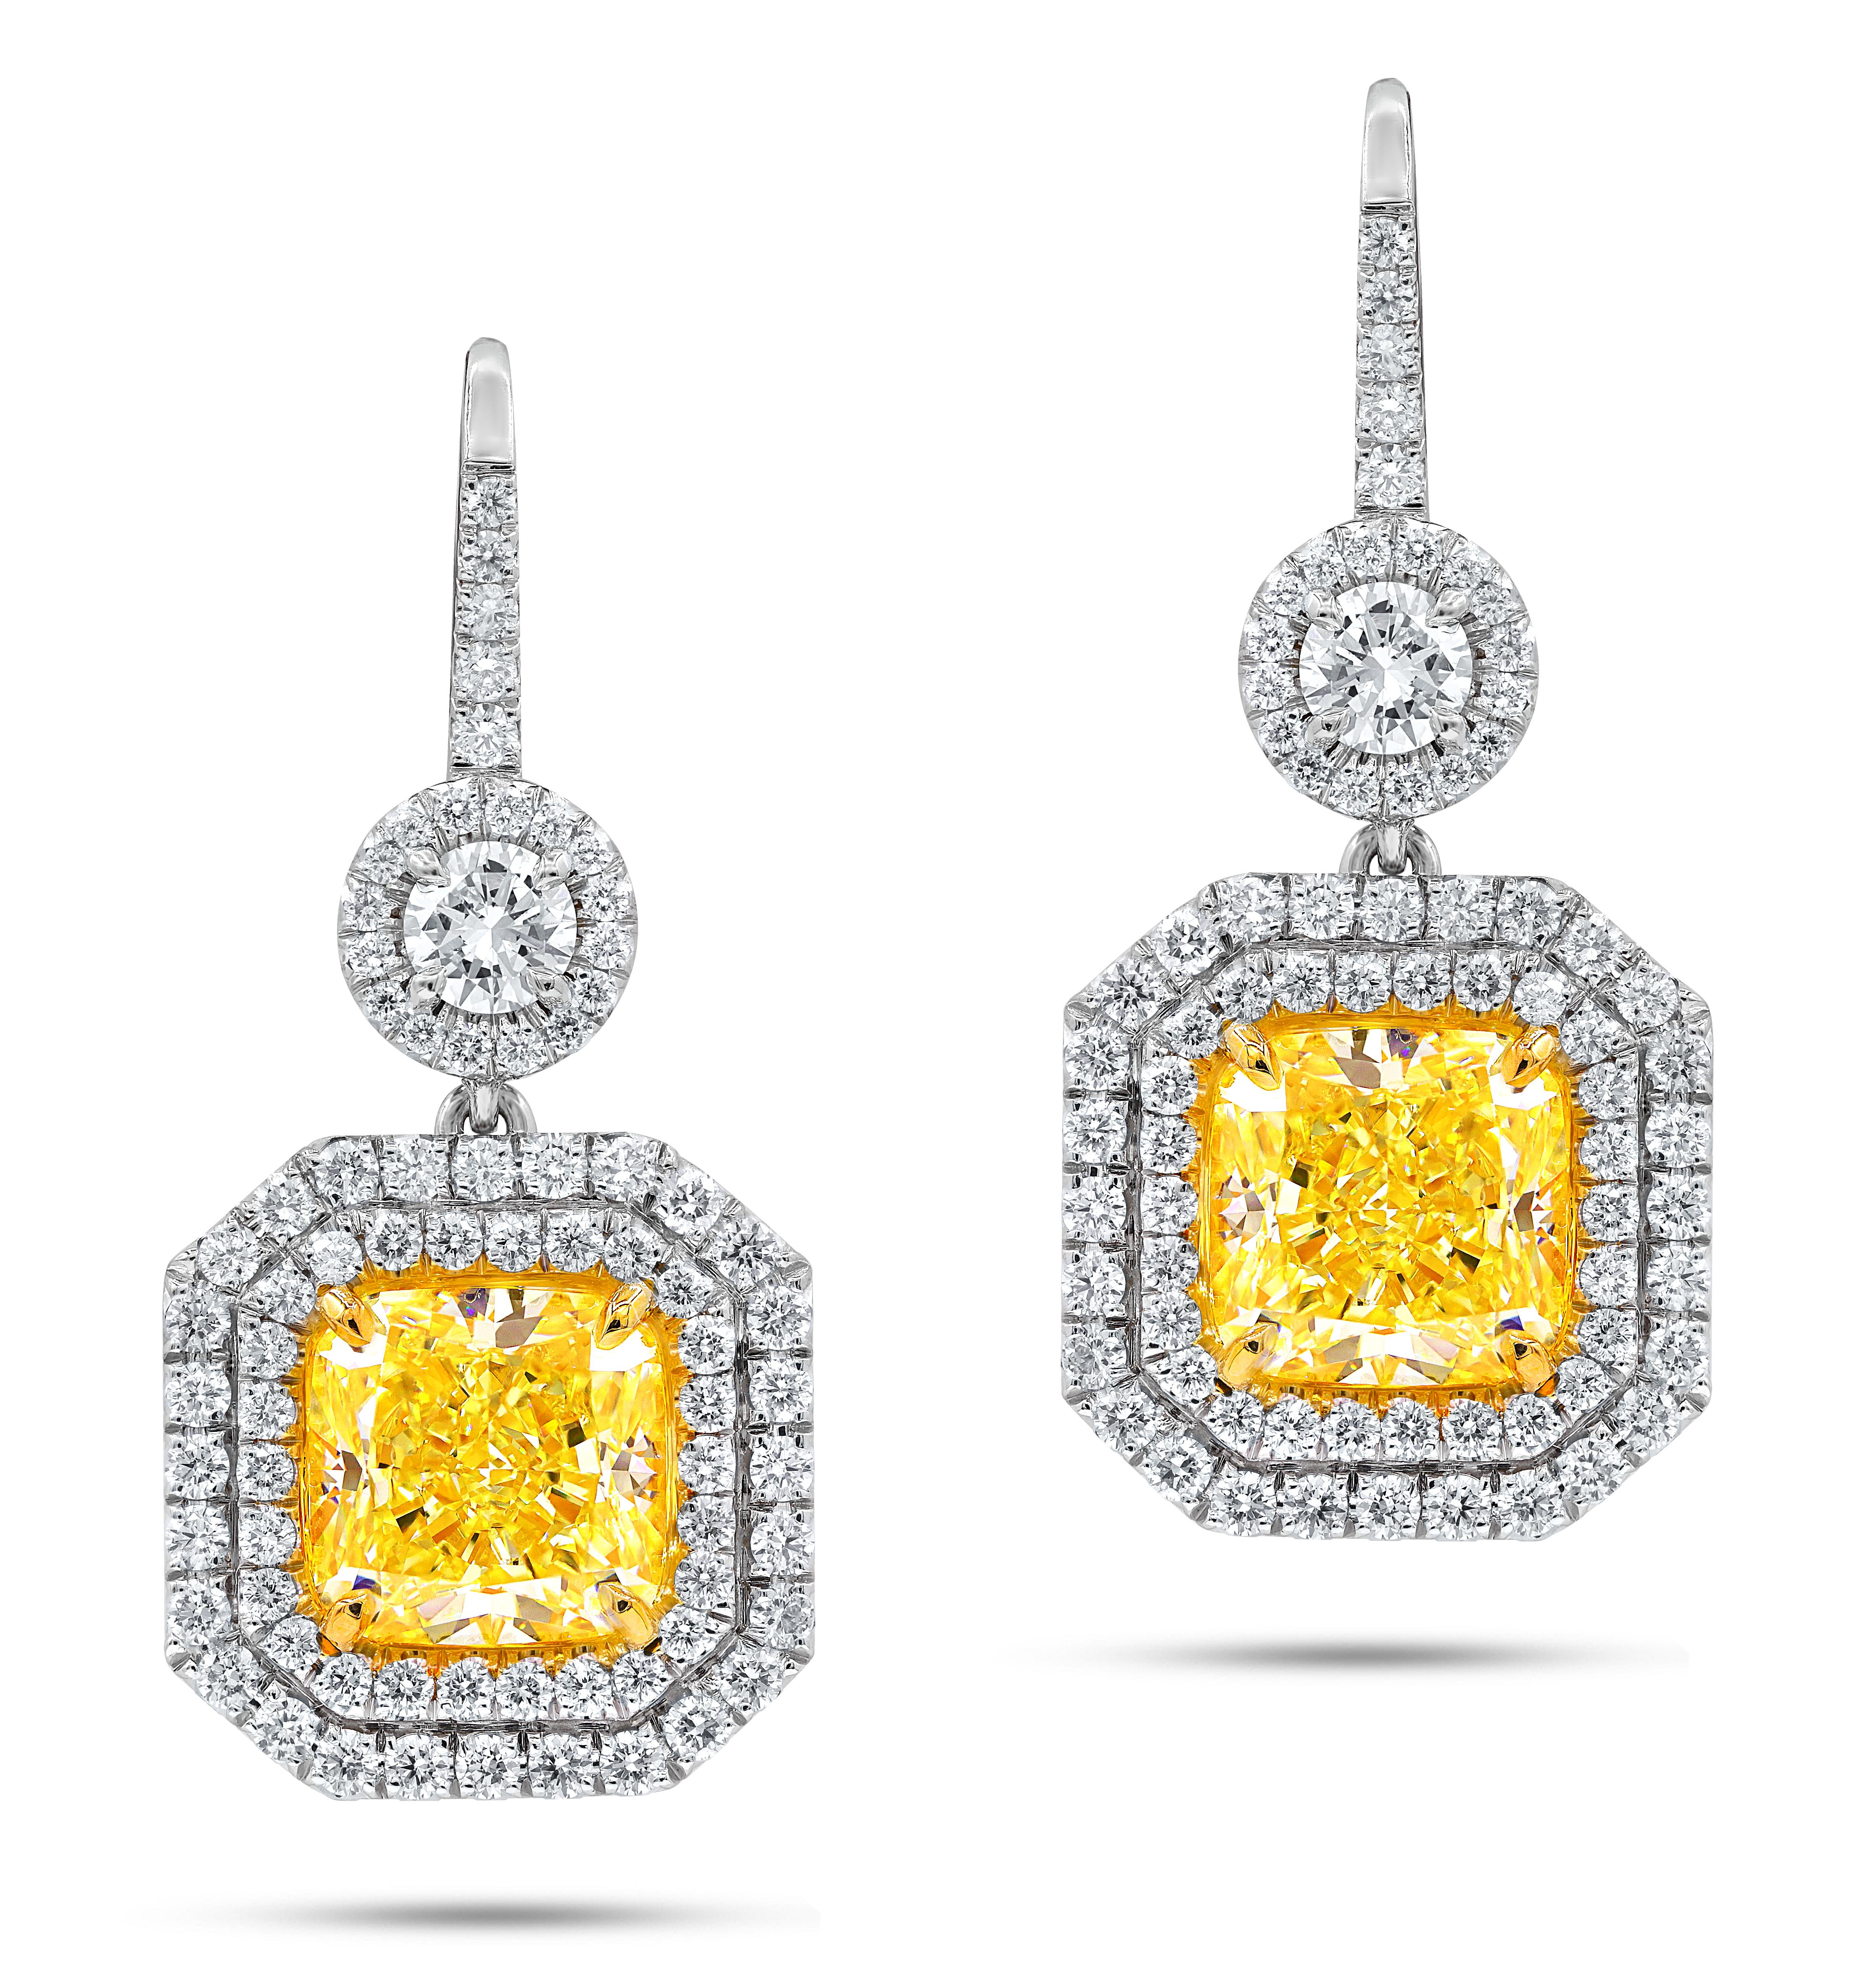 18kt fancy light yellow diamond earring set in a double halo setting, features gia certified yellow diamonds, 2.61ct vs1(rad1038) and 3.02ct vs2(radc1040) of fancy light yellow cushion cut diamonds and 1.75 carats of white diamonds around f-g/vs
